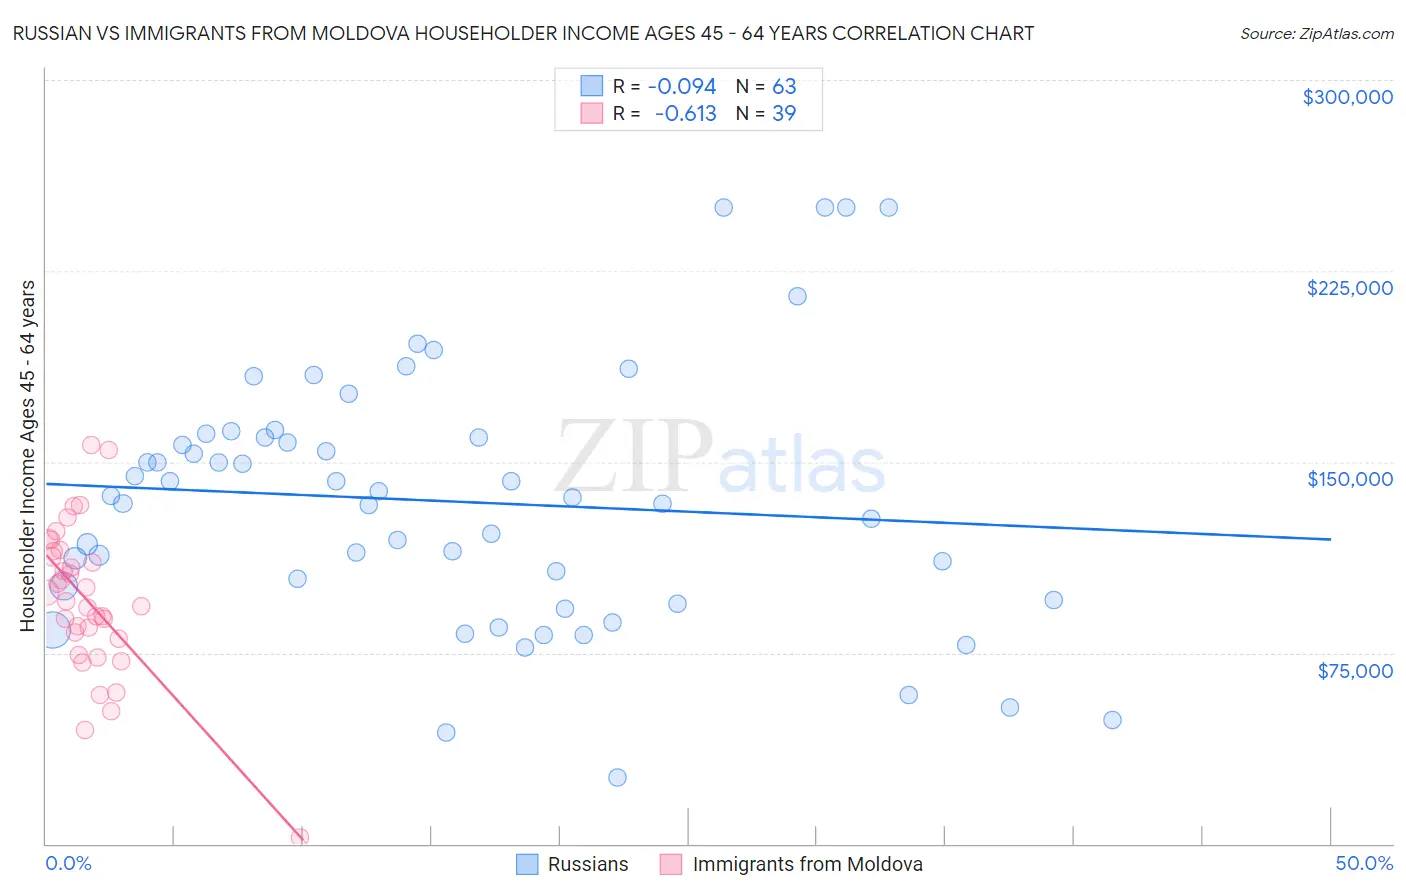 Russian vs Immigrants from Moldova Householder Income Ages 45 - 64 years